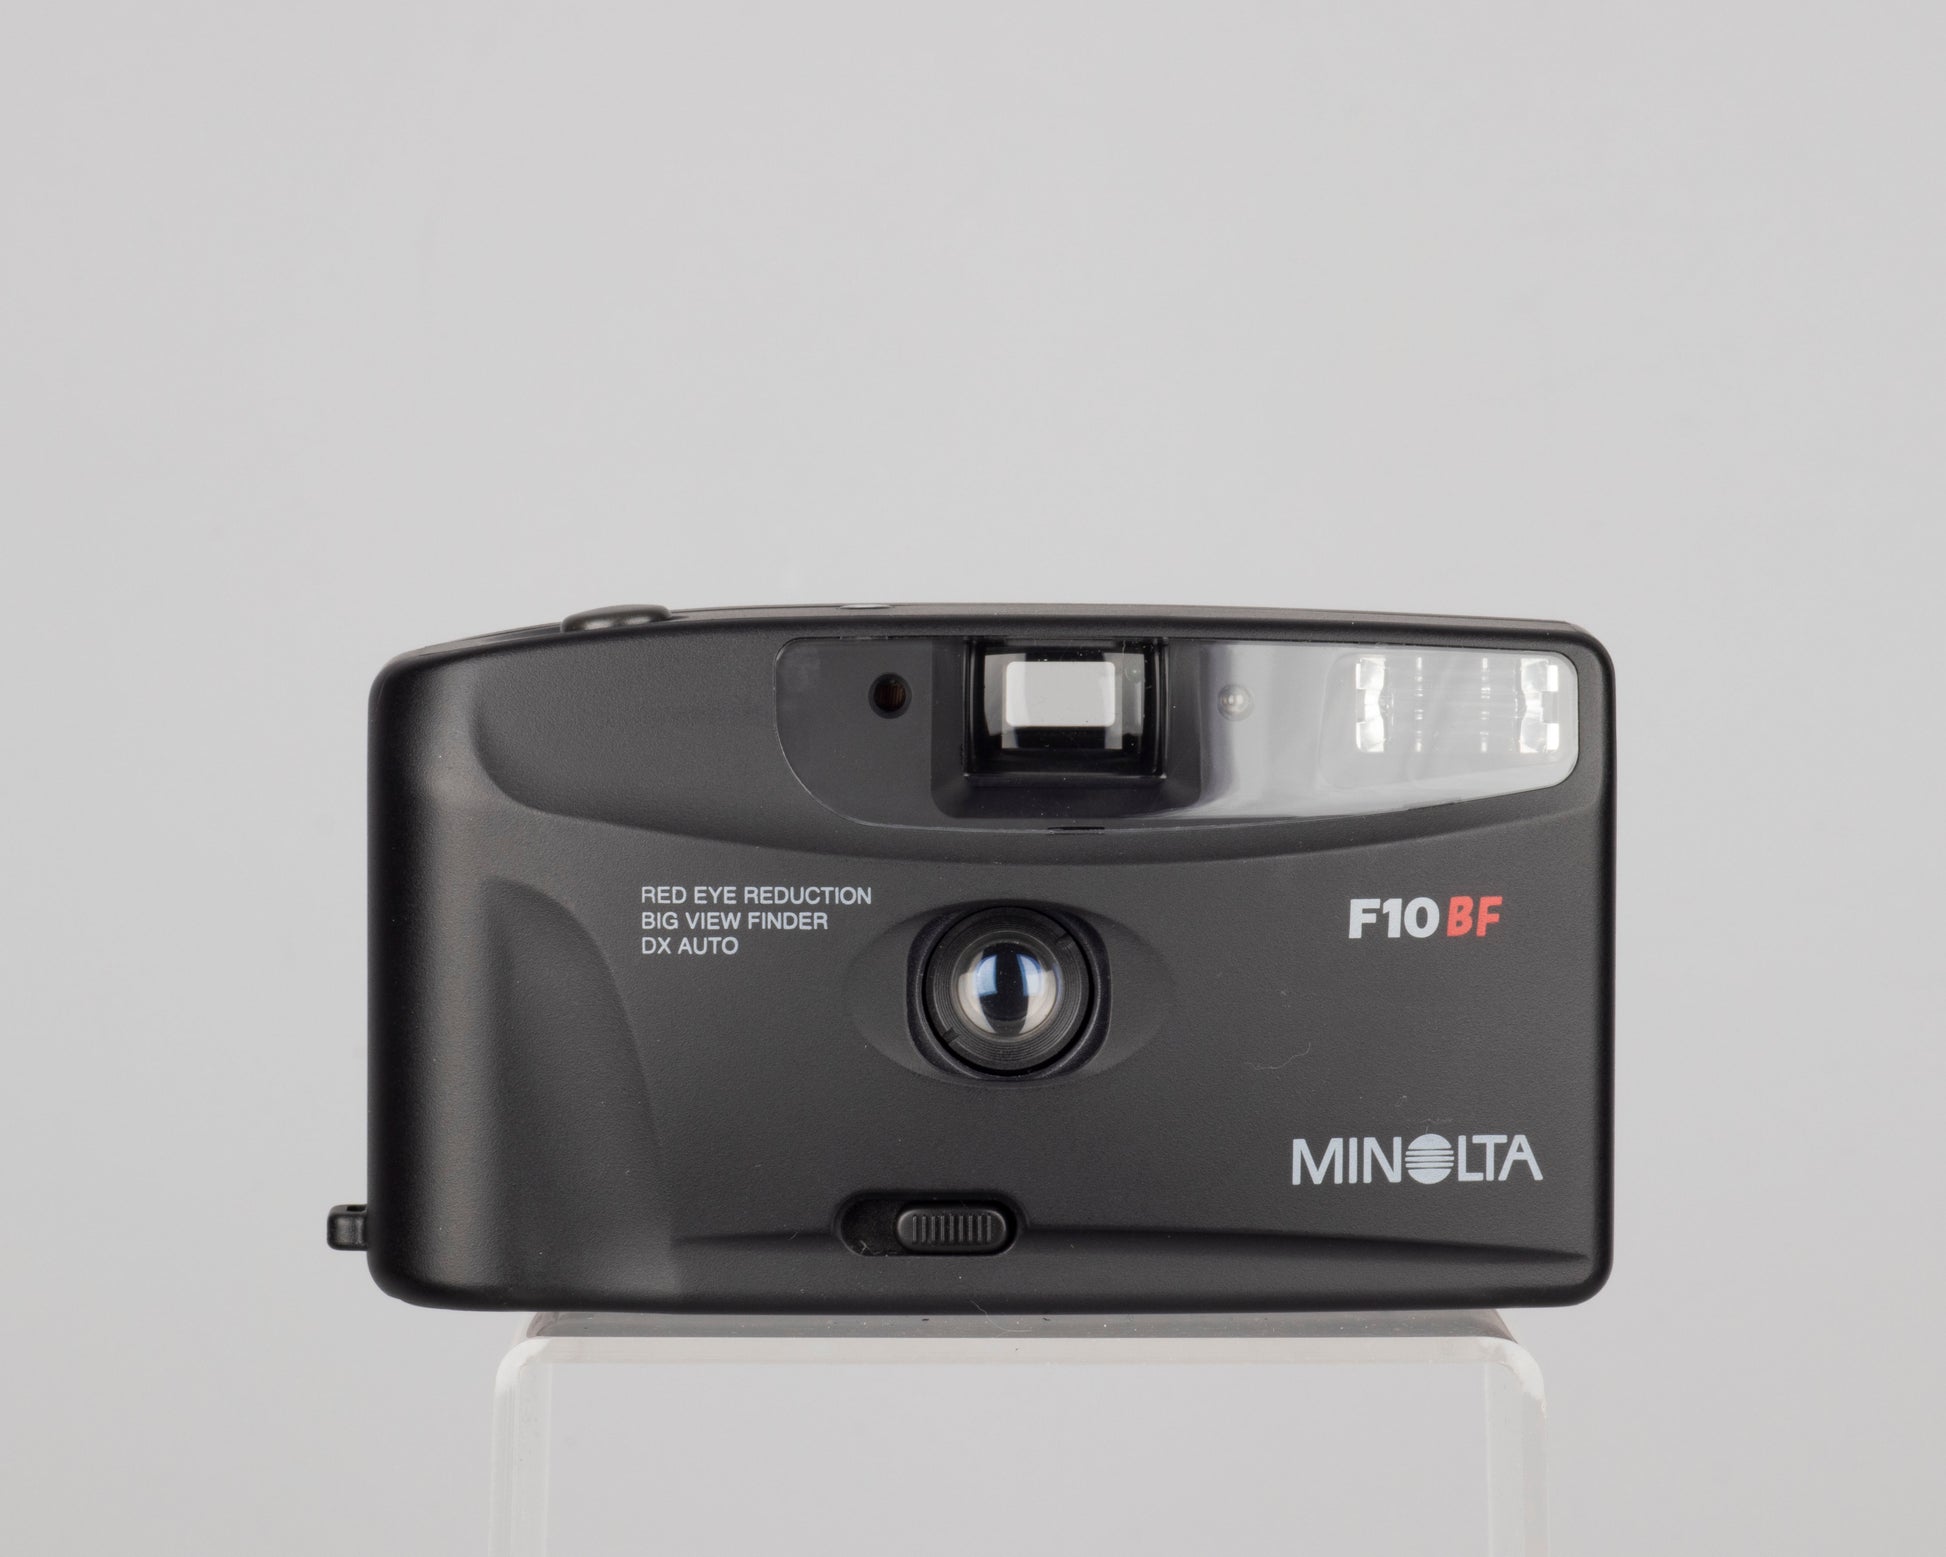 The Minolta F10BF is a simple motorized 35mm point-and-shoot from the late 1990s